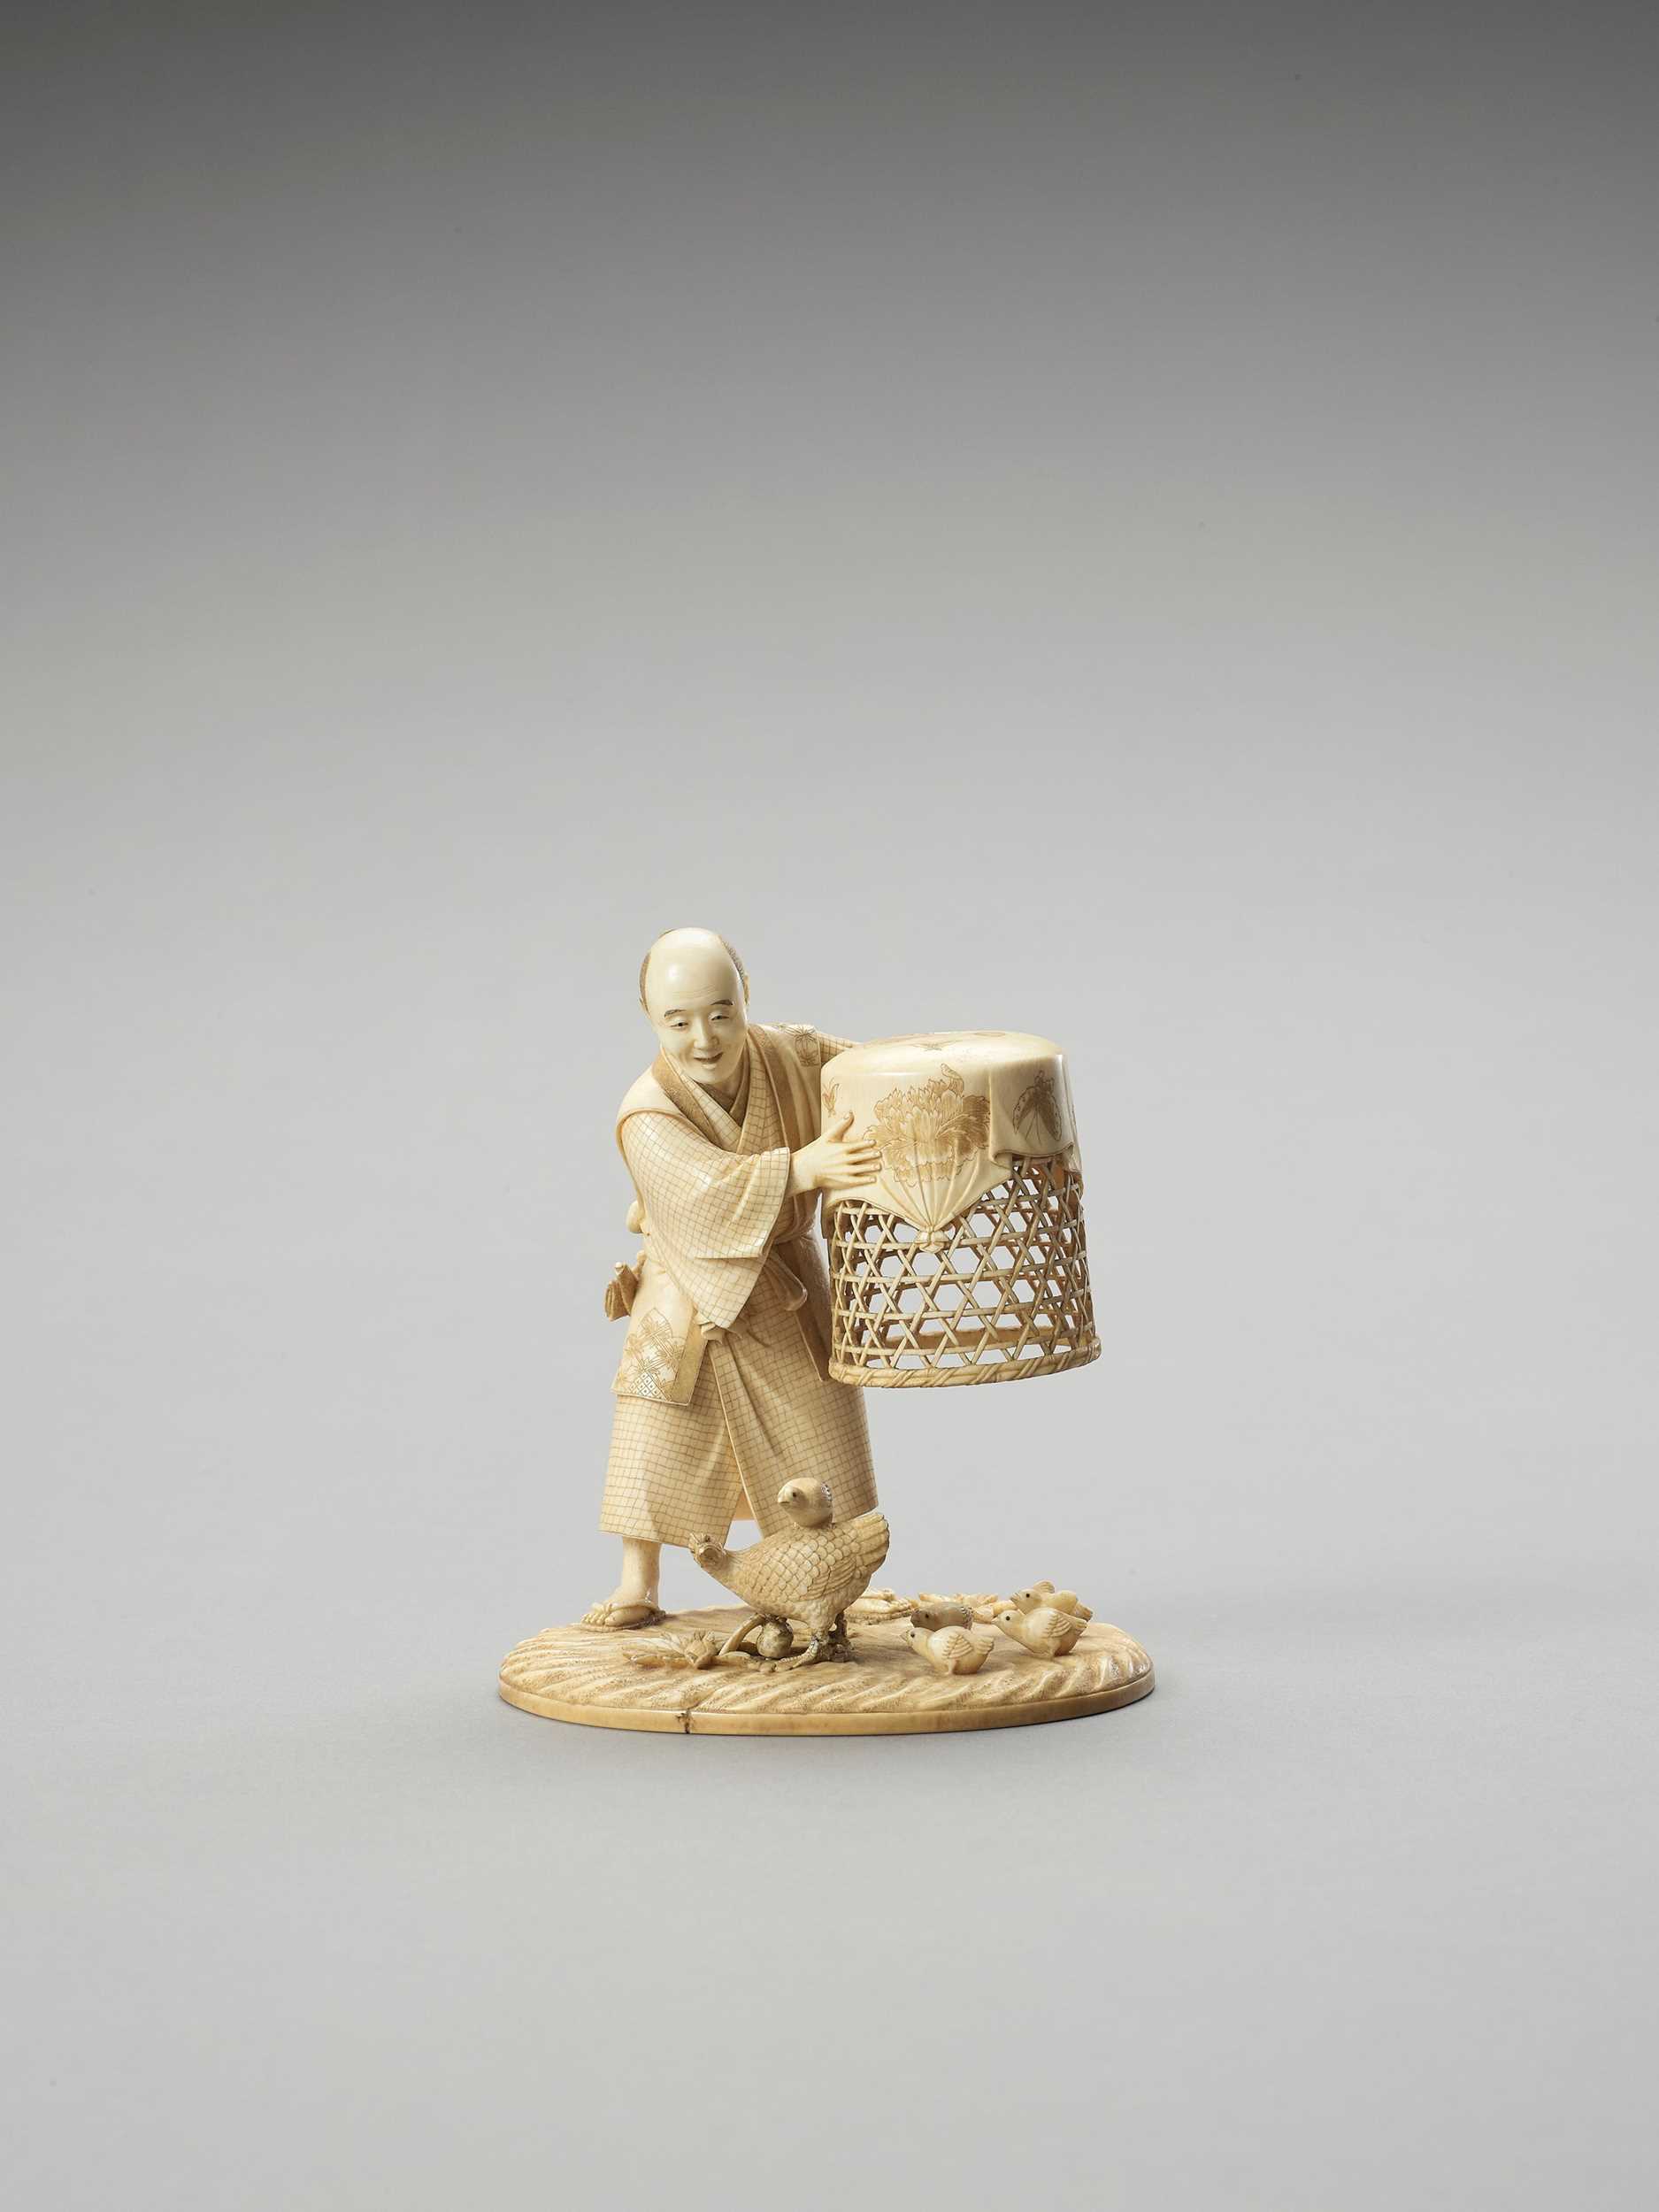 Lot 130 - MUNEHIRO: AN IVORY OKIMONO OF A MAN WITH CHICKENS